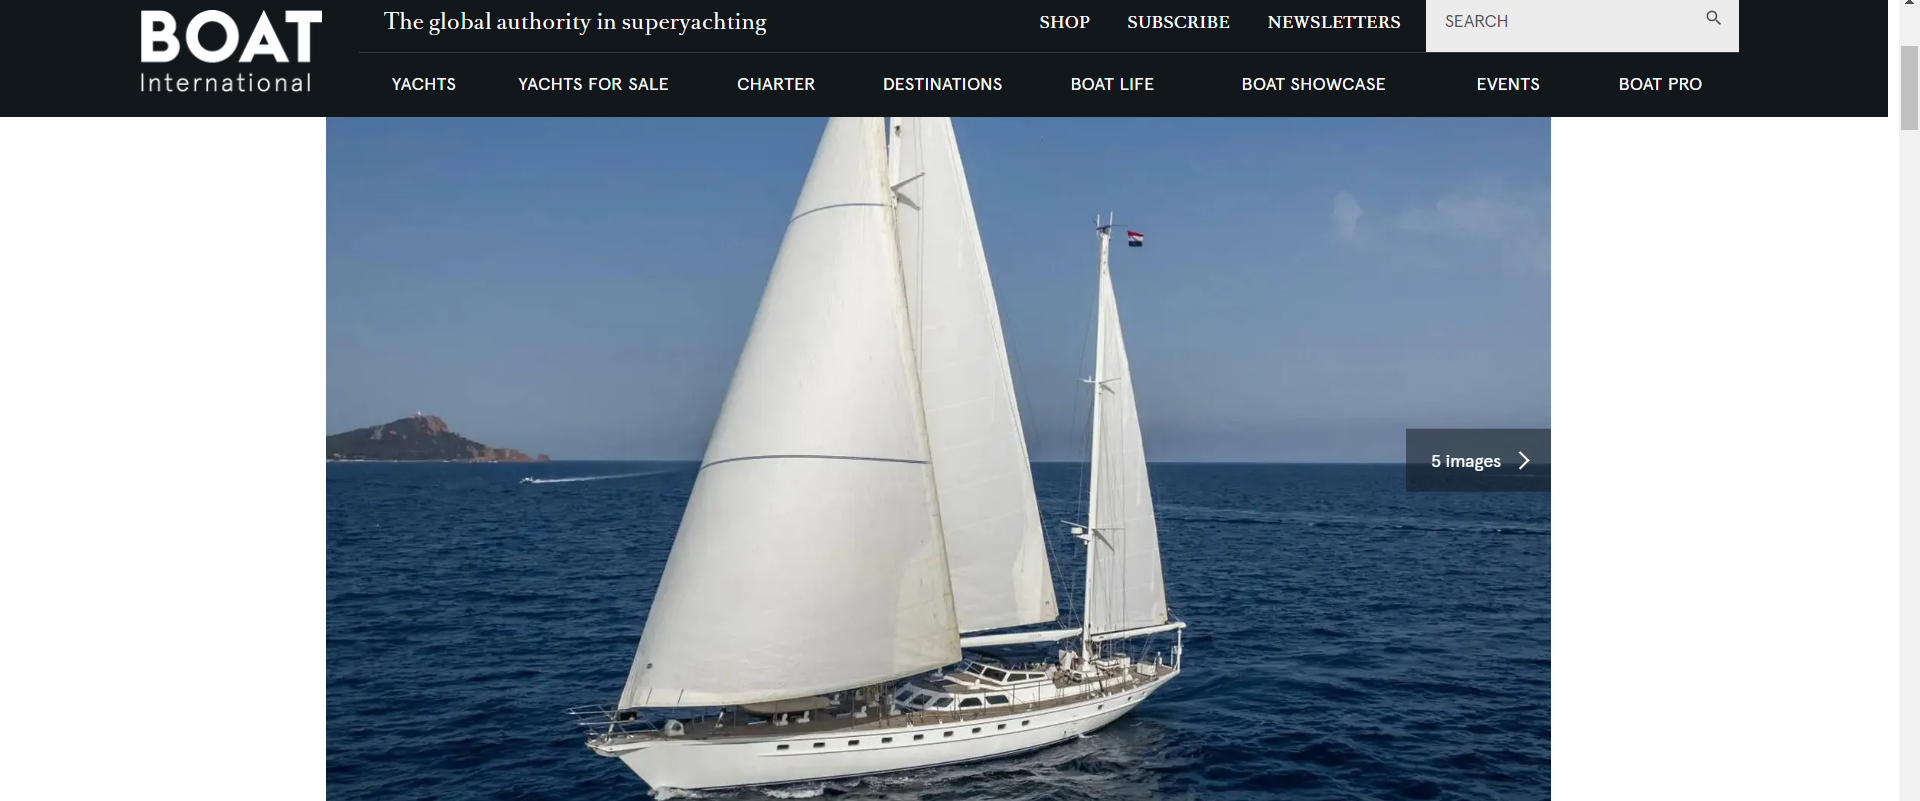 ALTAIR sailing yacht presented by Boat International magazine